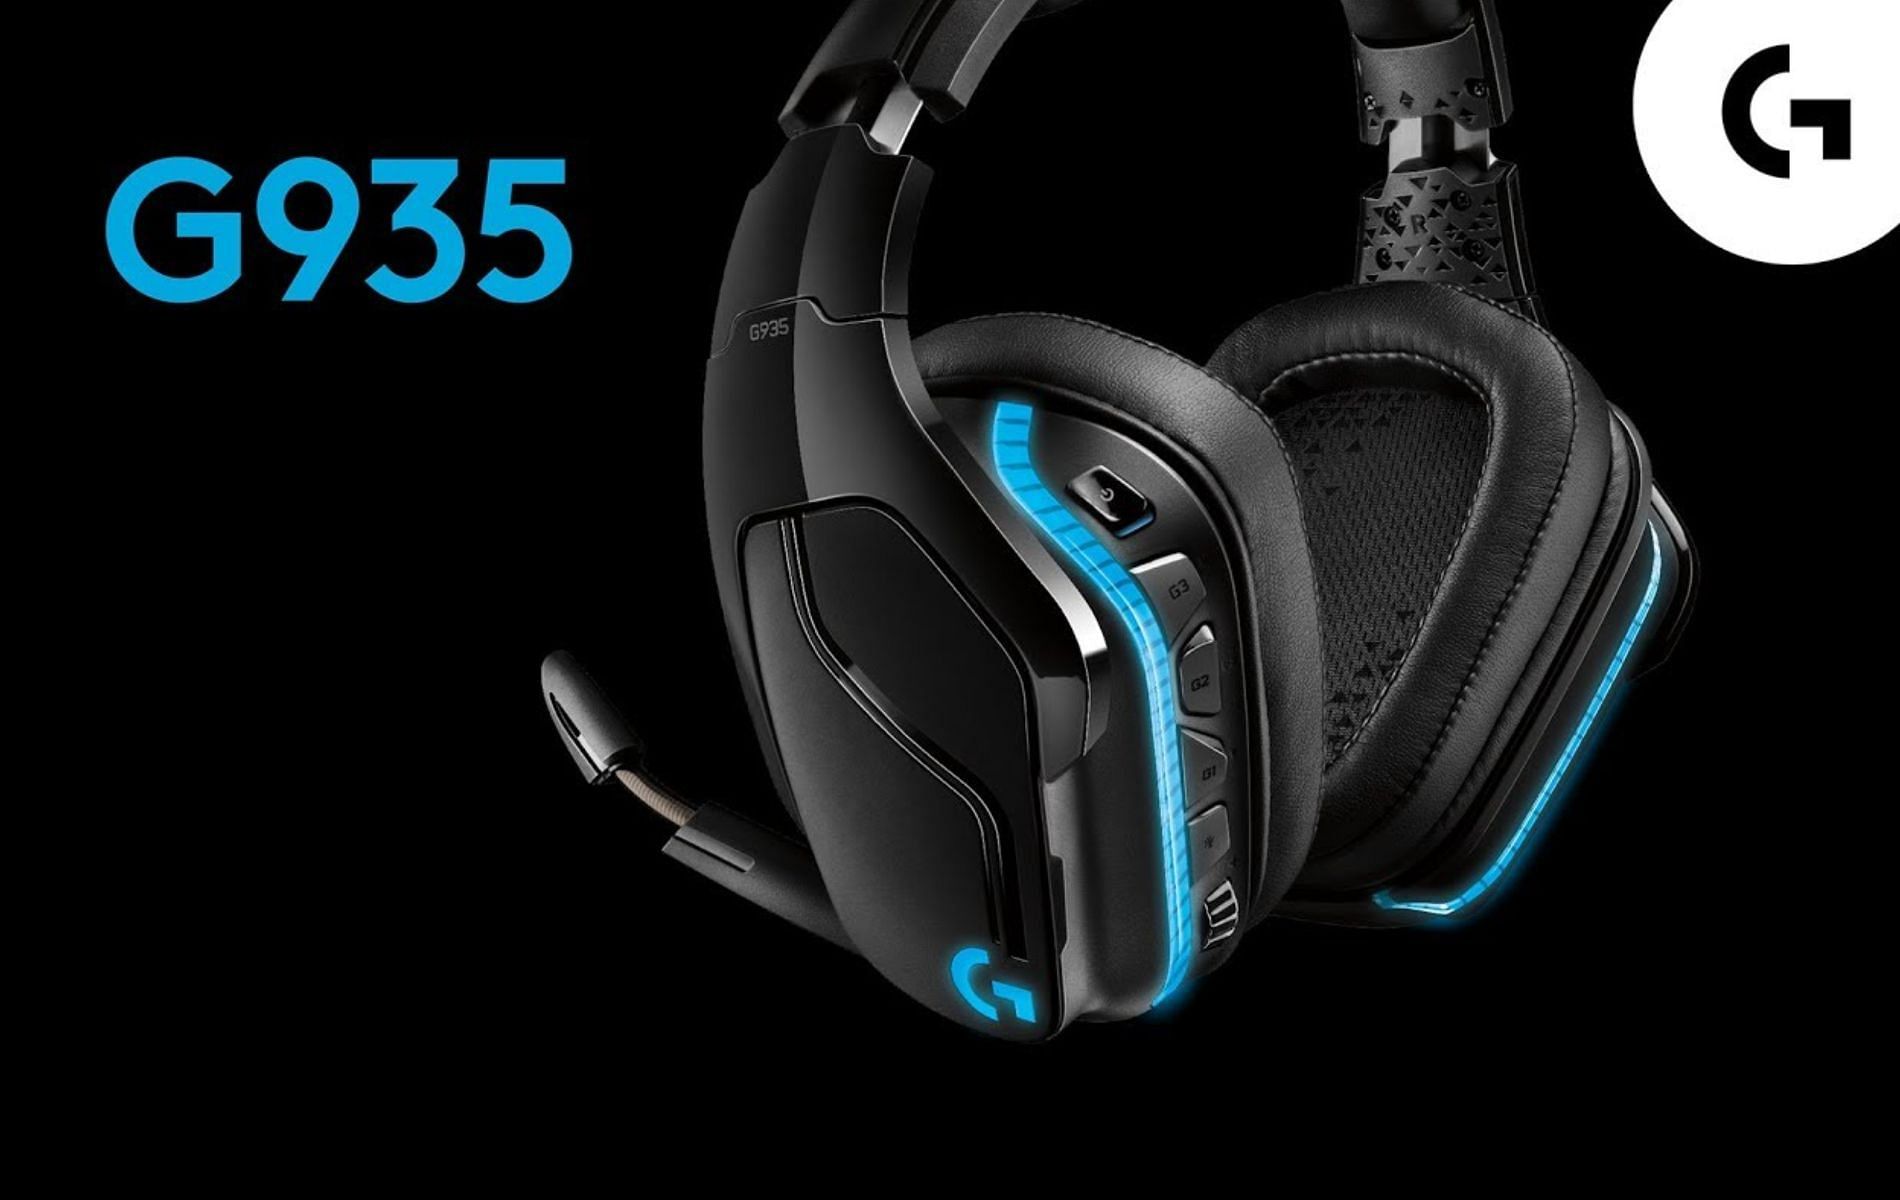 tæerne Mudret brevpapir Is the Logitech G935 wireless gaming headset worth buying in February 2023?